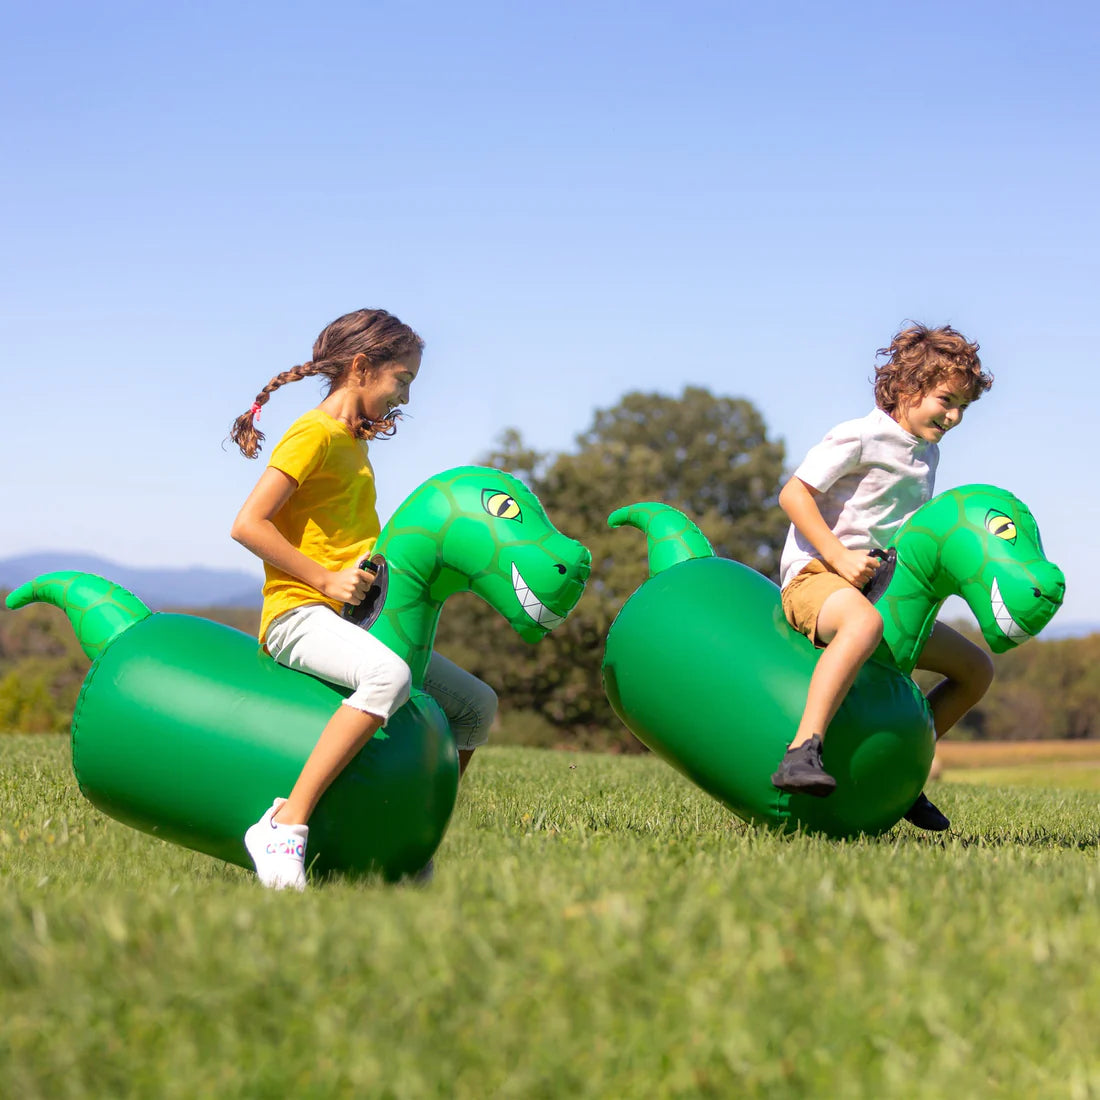 Inflatable Ride-On Hop 'n Go Dino